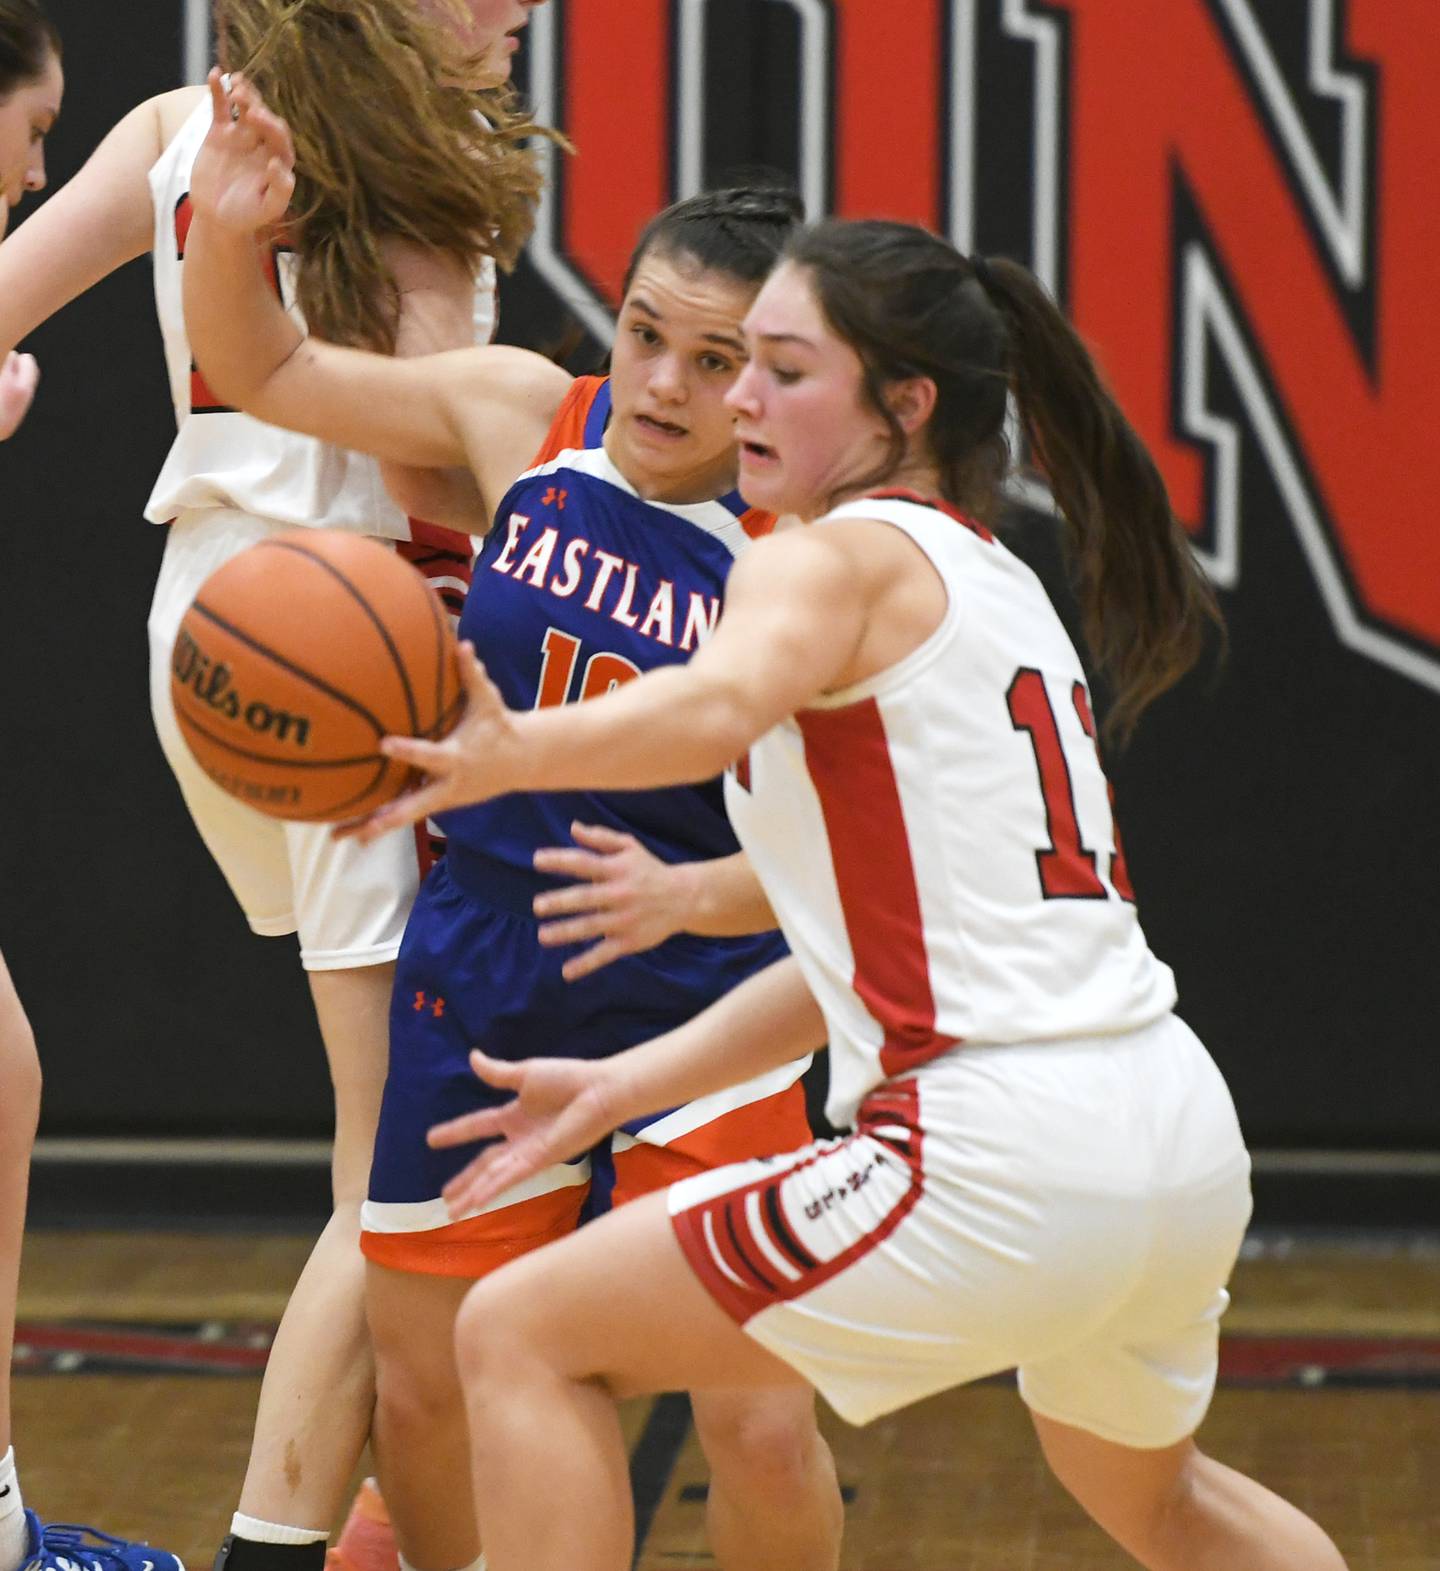 Eastland's Paige Joiner (10) and Forreston's Brooke Boettner (11) reach for a loose ball during a NUIC game on Friday, Feb. 3 in Forreston.